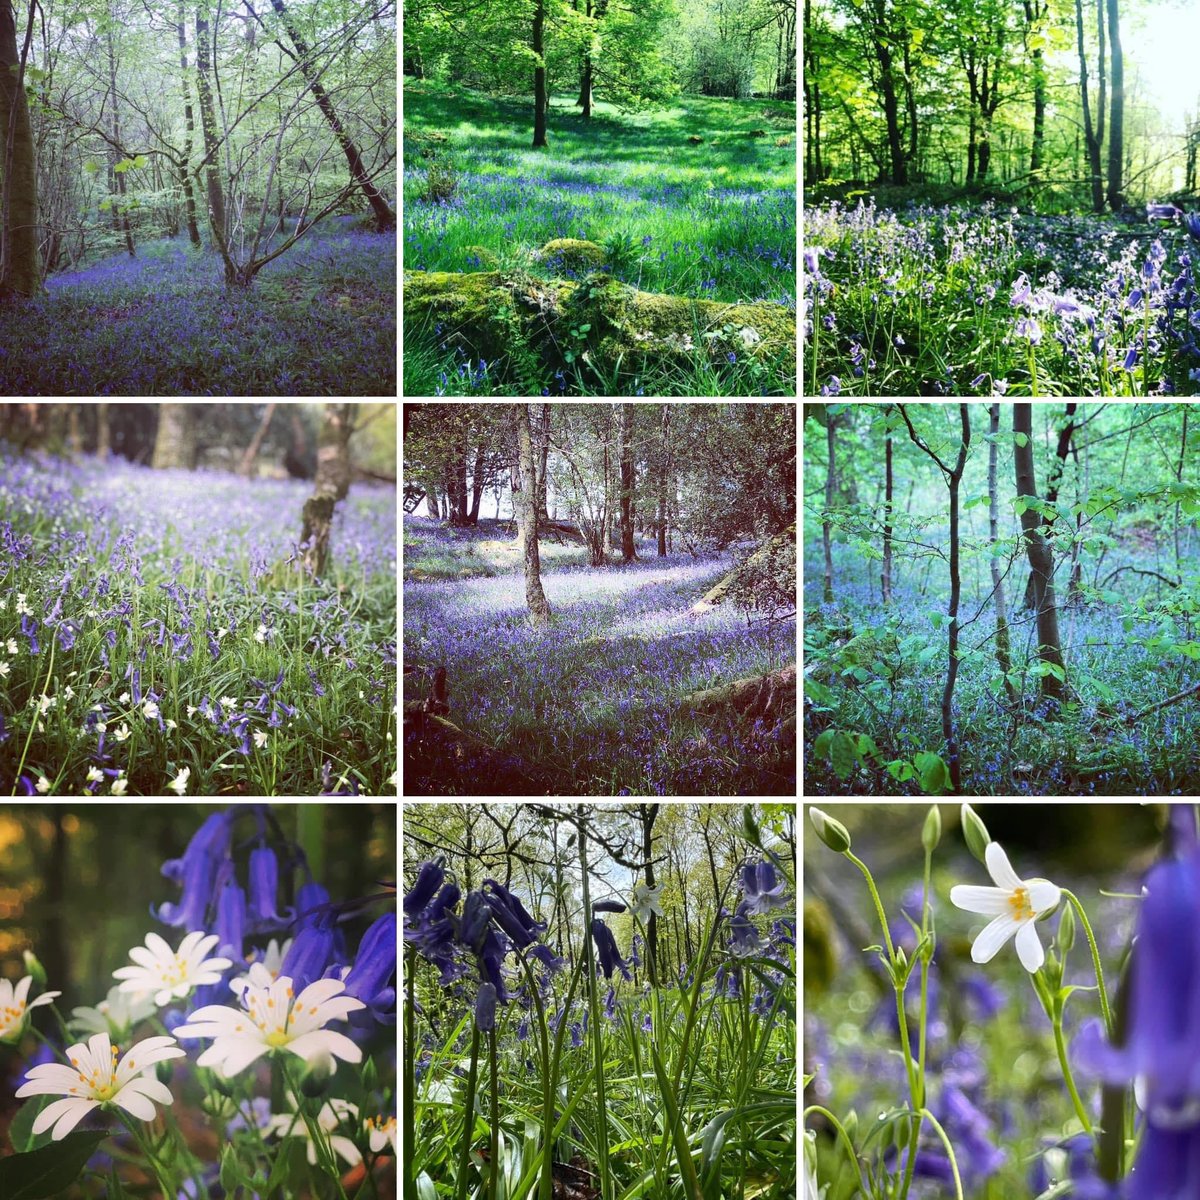 💙 #bluebells #wildflowers #woodlandflowers #flowers #spring #woodlandfloor #woodland #woods #forest #trees #plants #nature #goodforthesoul #naturephotography #forestphotography #photograghy #windermere #LakeDistrict #Cumbria #walking #wellbeing